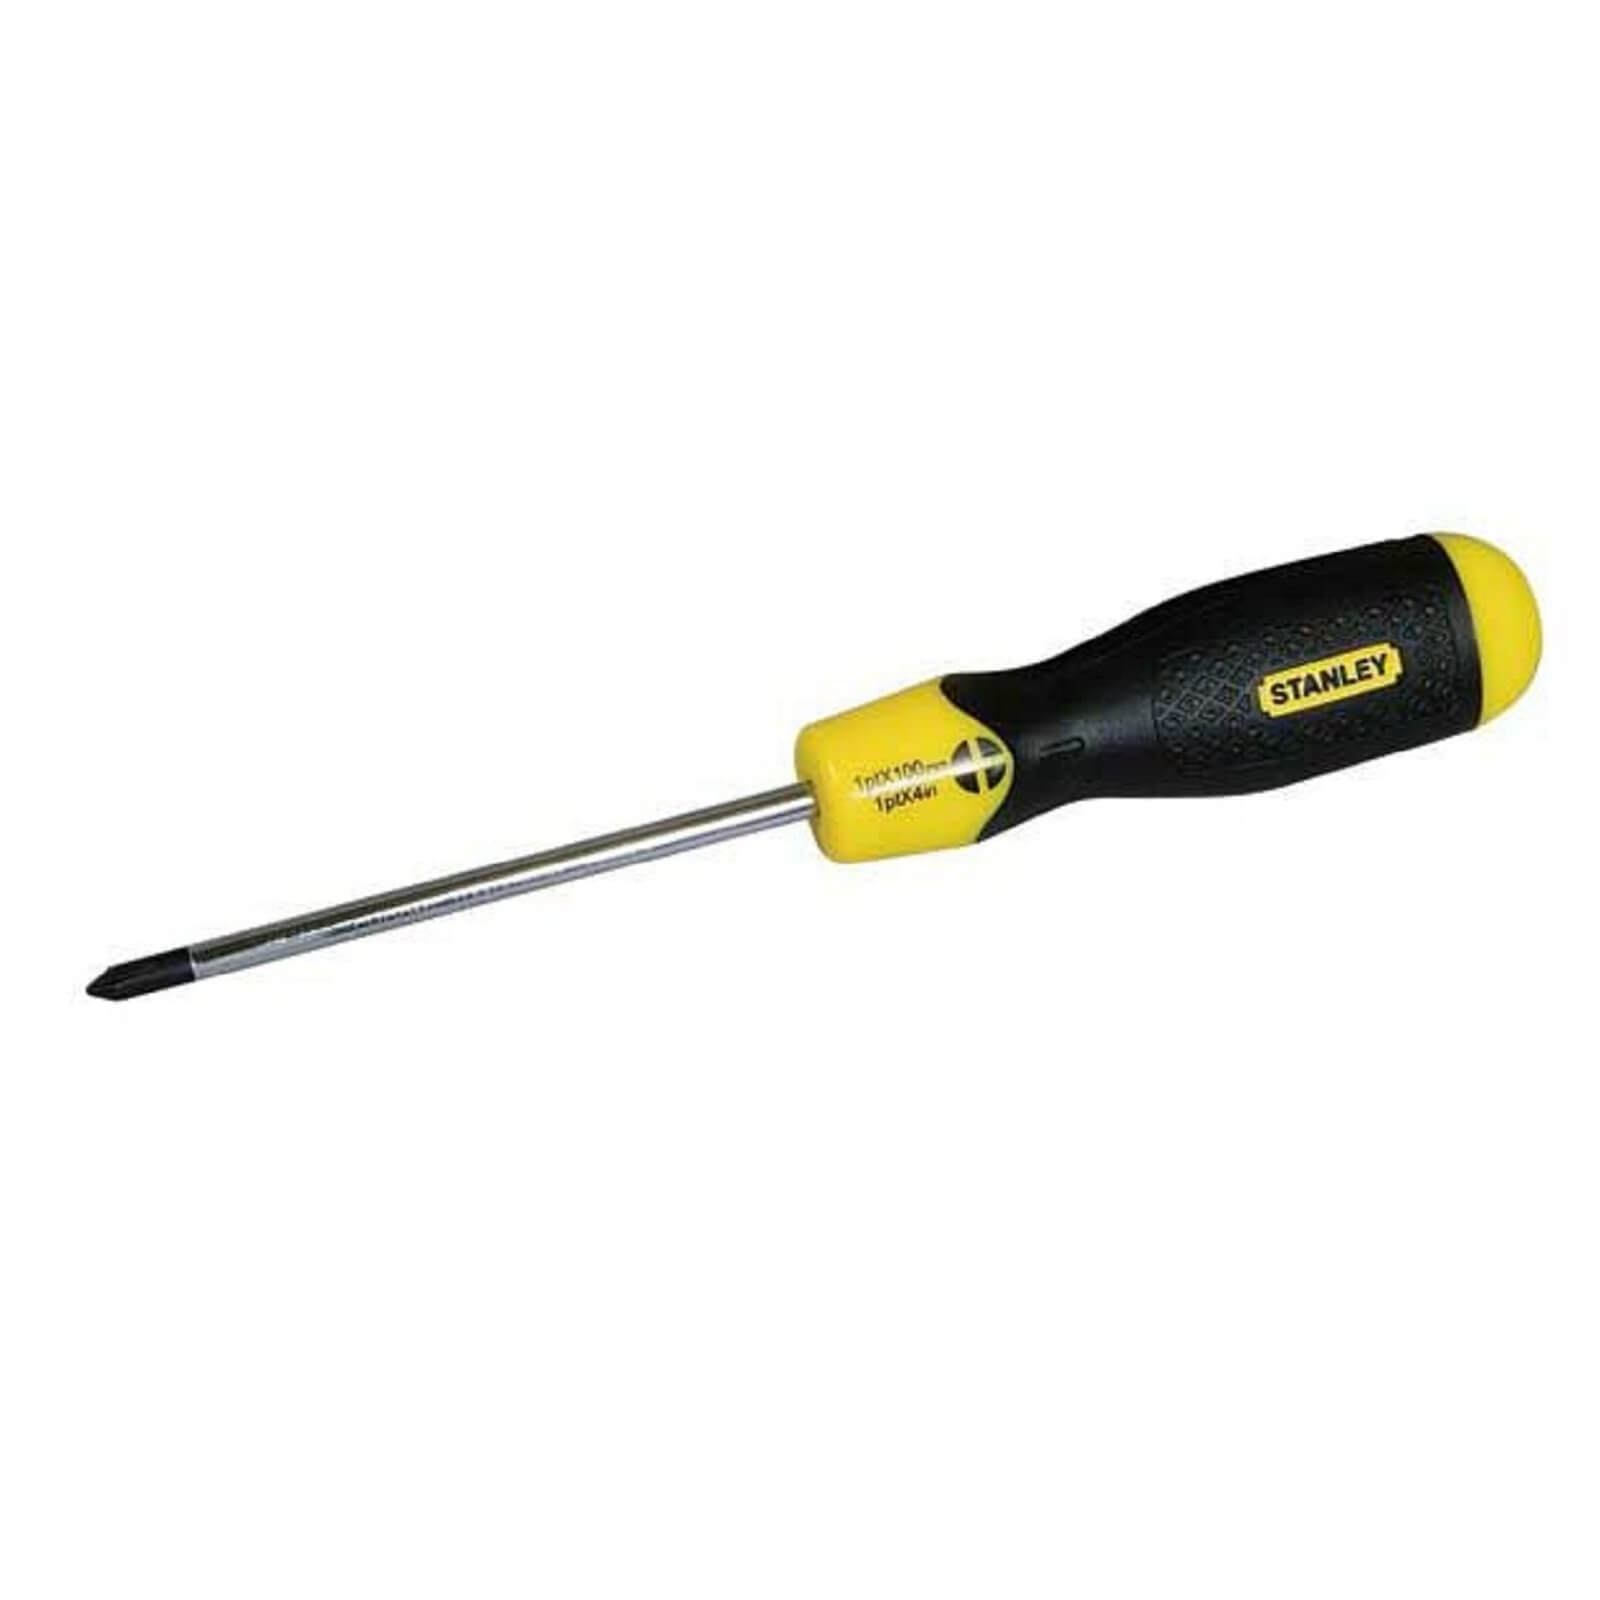 Photo of Stanley Cushion Grip Philips Screwdriver - No. 3x150mm